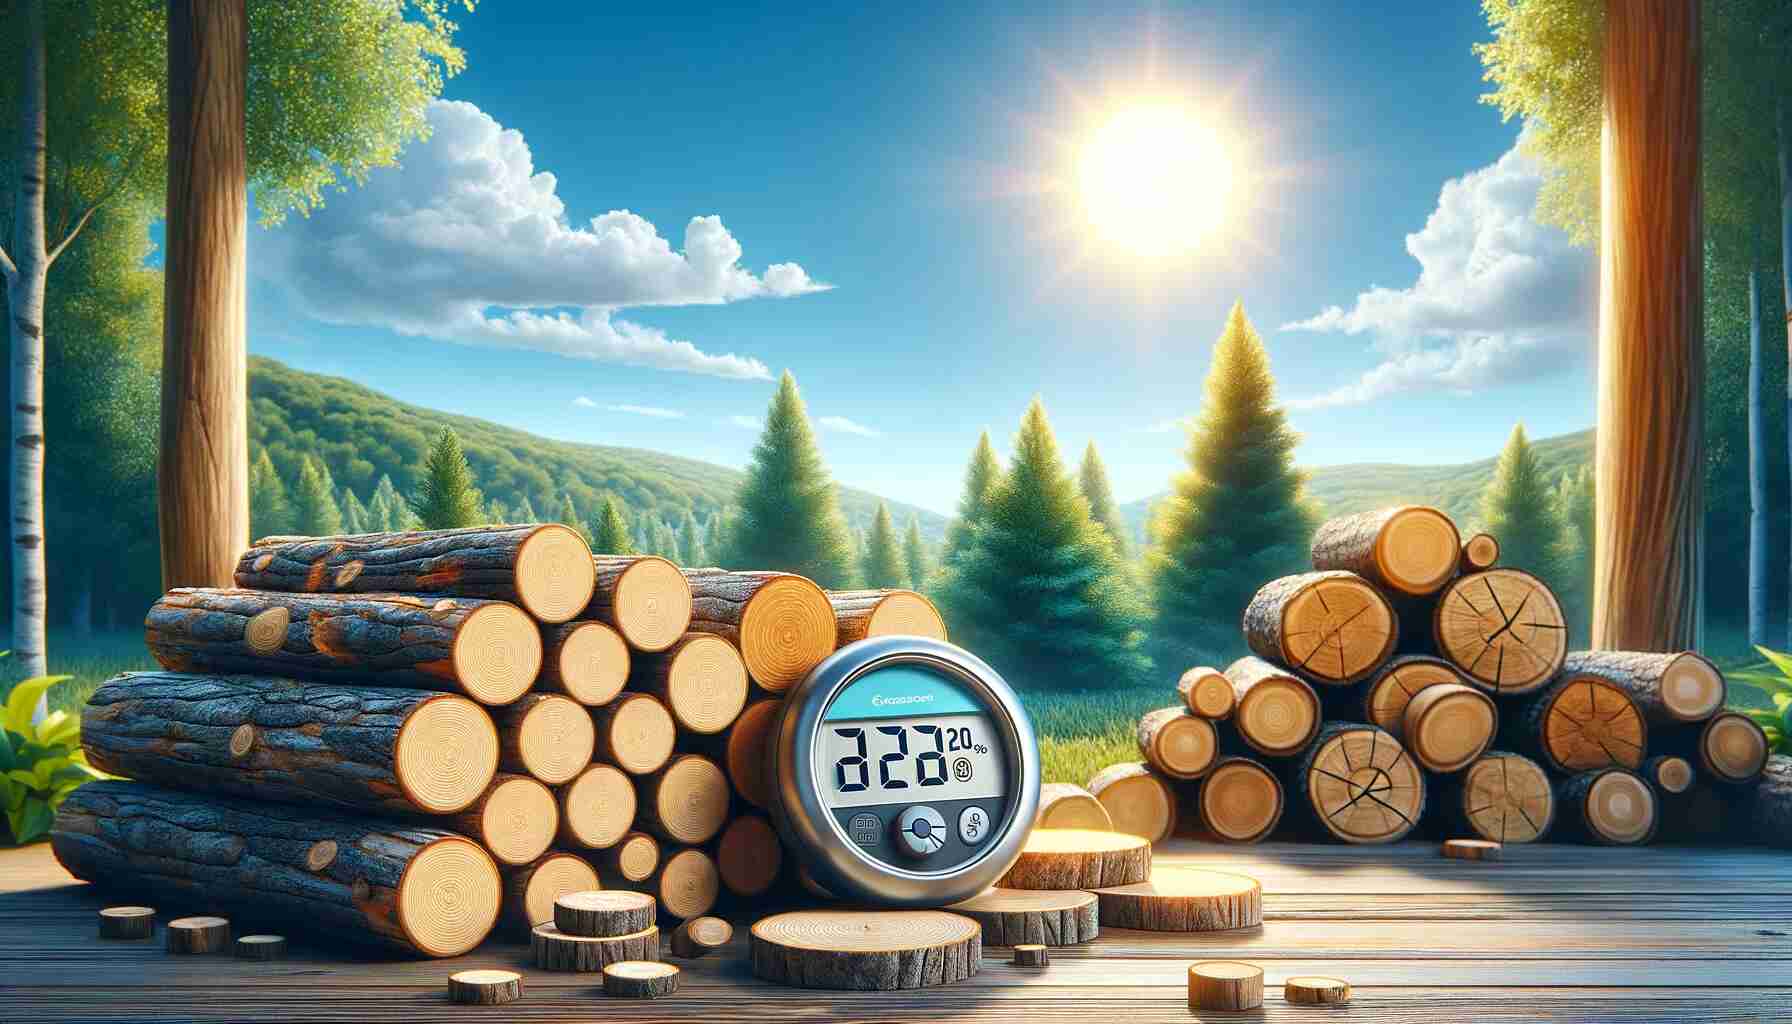 Here is the featured image for "How to Dry Firewood Quickly: Tips and Techniques." It depicts an outdoor scene with neatly stacked logs of firewood under a bright sun, highlighting the natural drying process, and includes a digital hygrometer showing low humidity, set against a backdrop of a lush forest and clear blue sky.